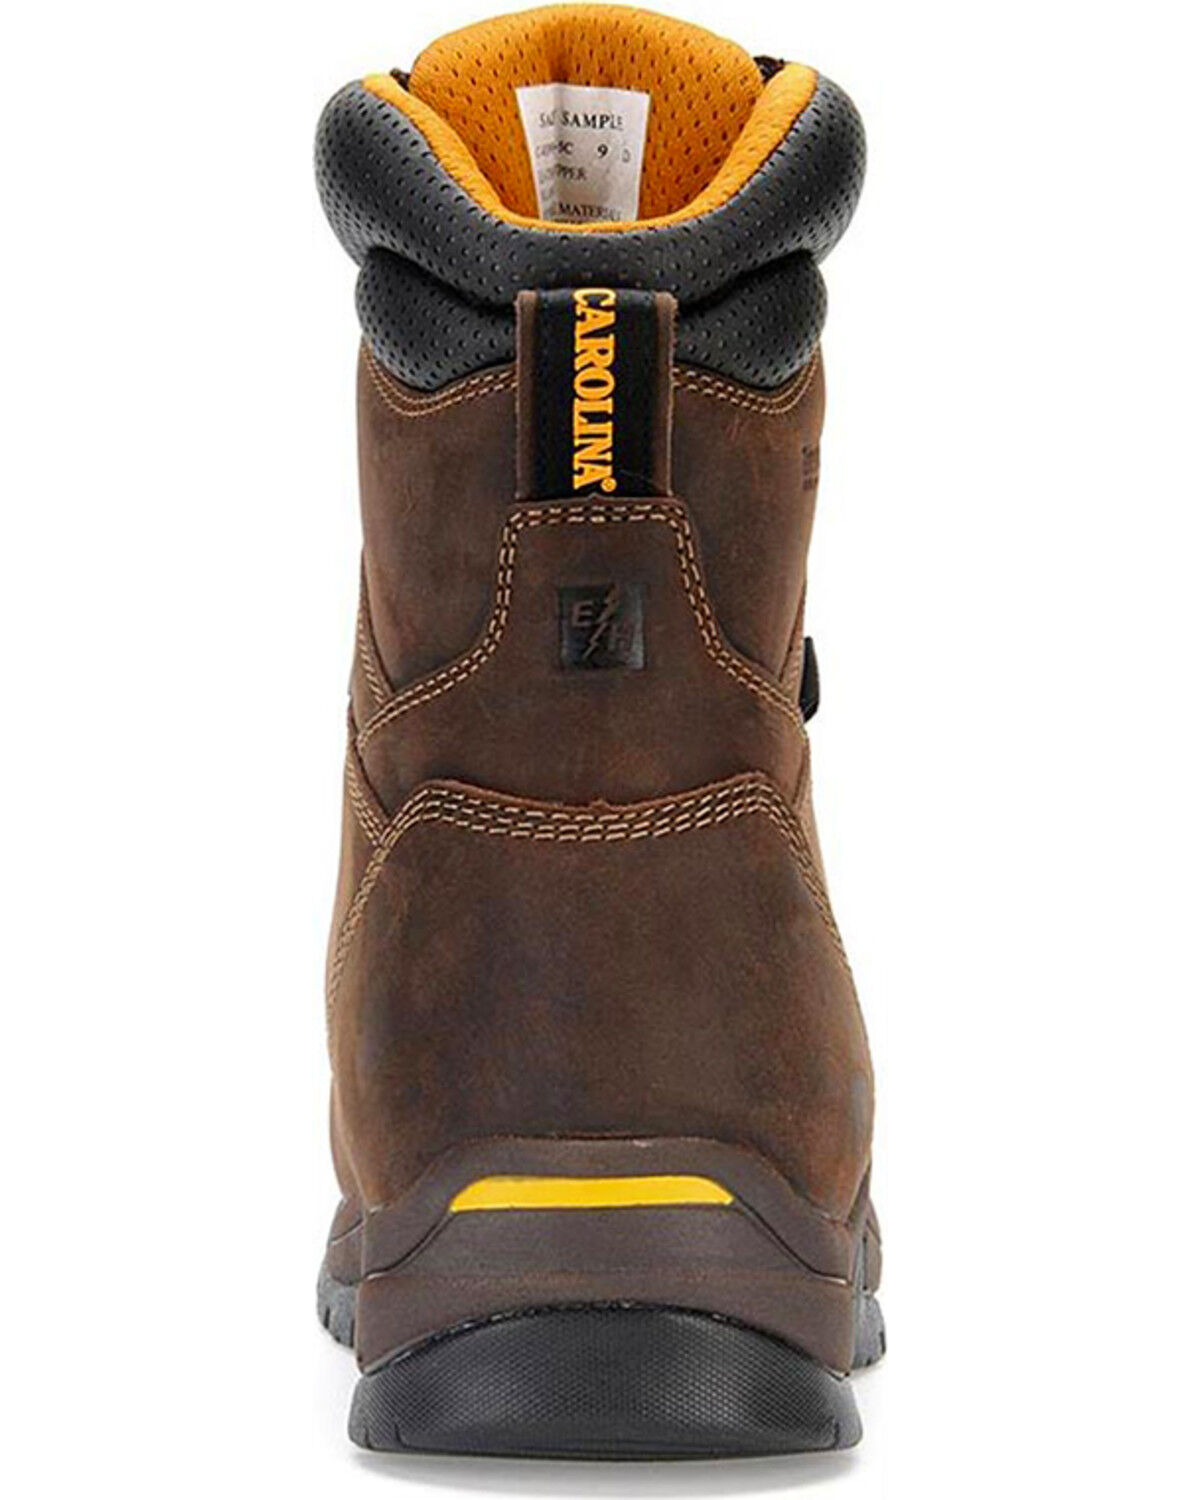 insulated work boots composite toe